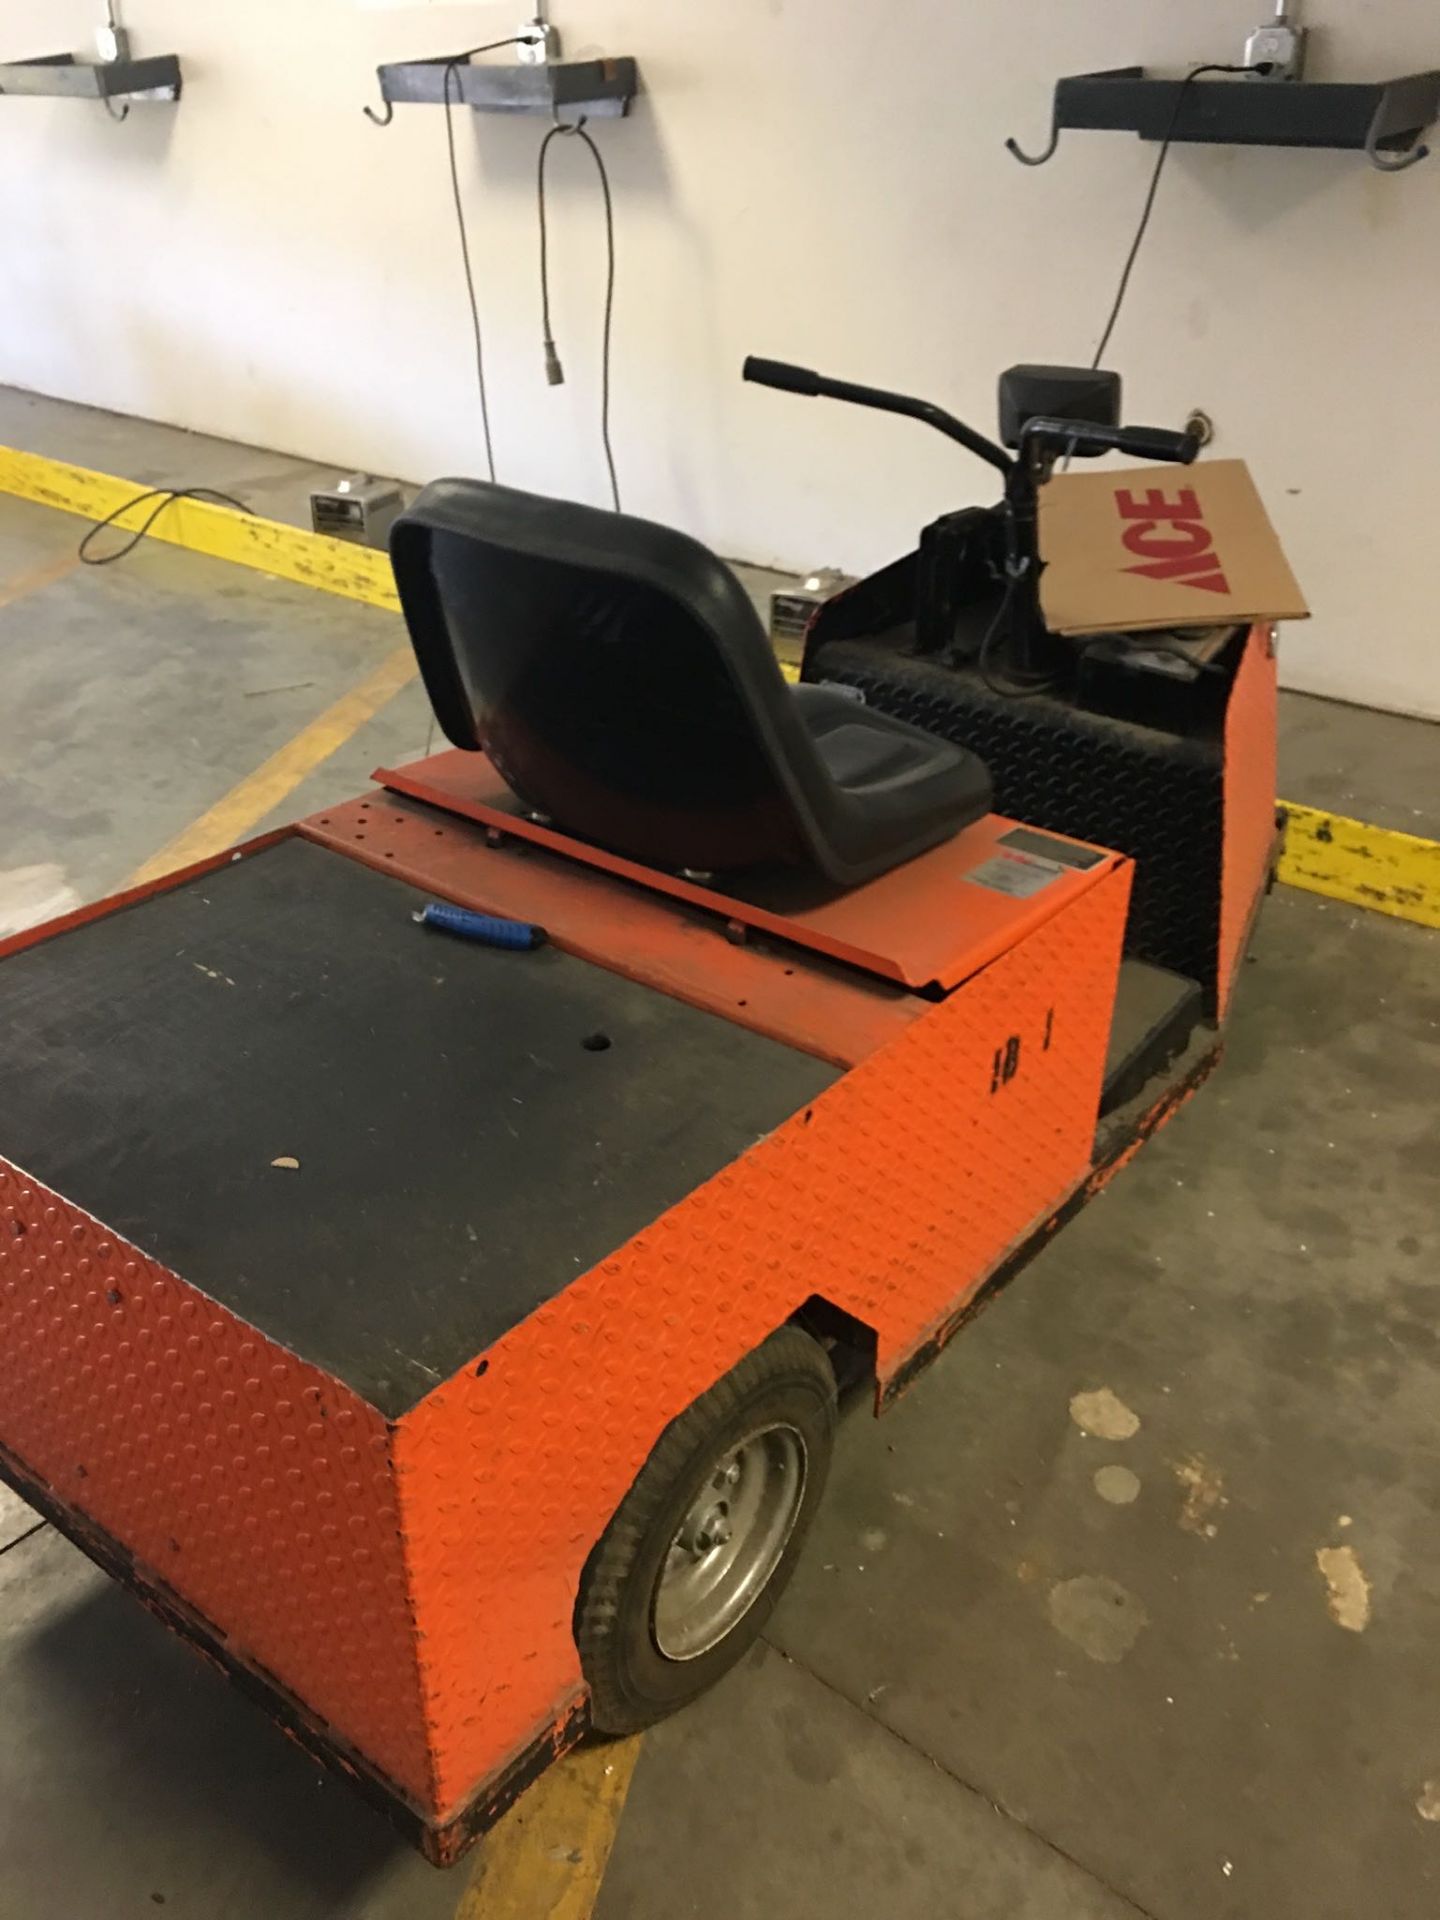 Asset 1B1 - Mortec L-242 S/N: 1046291 orange service cart. Please see photos for additional - Image 2 of 3